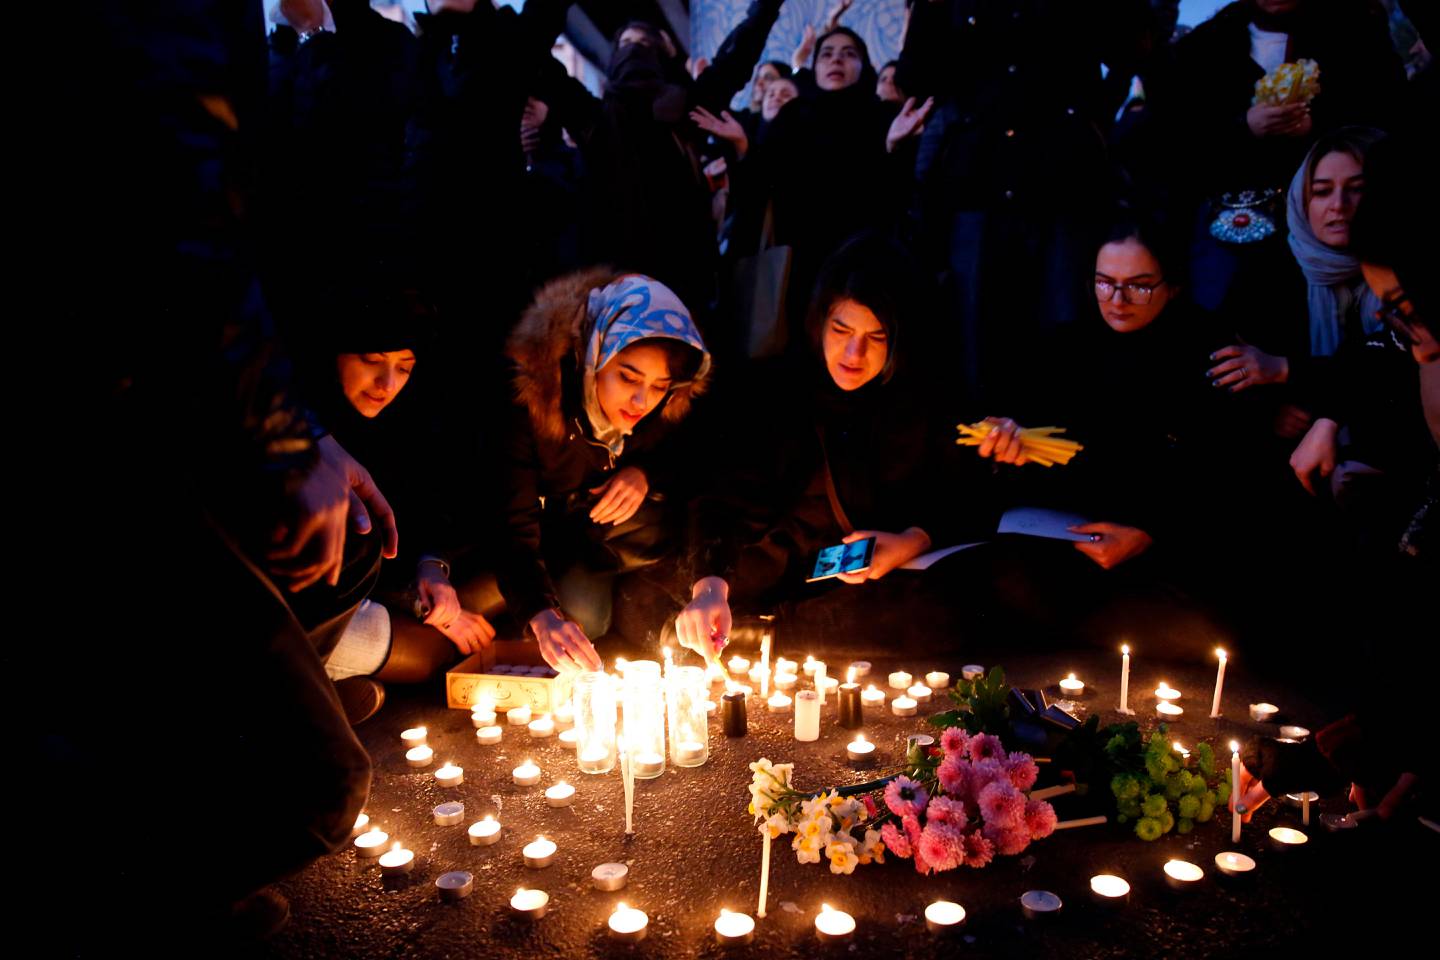 Iranians light candles for the victims of Ukraine International Airlines Boeing 737 during a gathering in front of the Amirkabir University in the capital Tehran, on January 11, 2020. - Iran said it "unintentionally" shot down a Ukrainian passenger jet, killing all 176 people aboard, in an abrupt about-turn after initially denying Western claims it was struck by a missile. President Hassan Rouhani said a military probe into the tragedy had found "missiles fired due to human error" brought down the Boeing 737, calling it an "unforgivable mistake". (Photo by - / AFP)